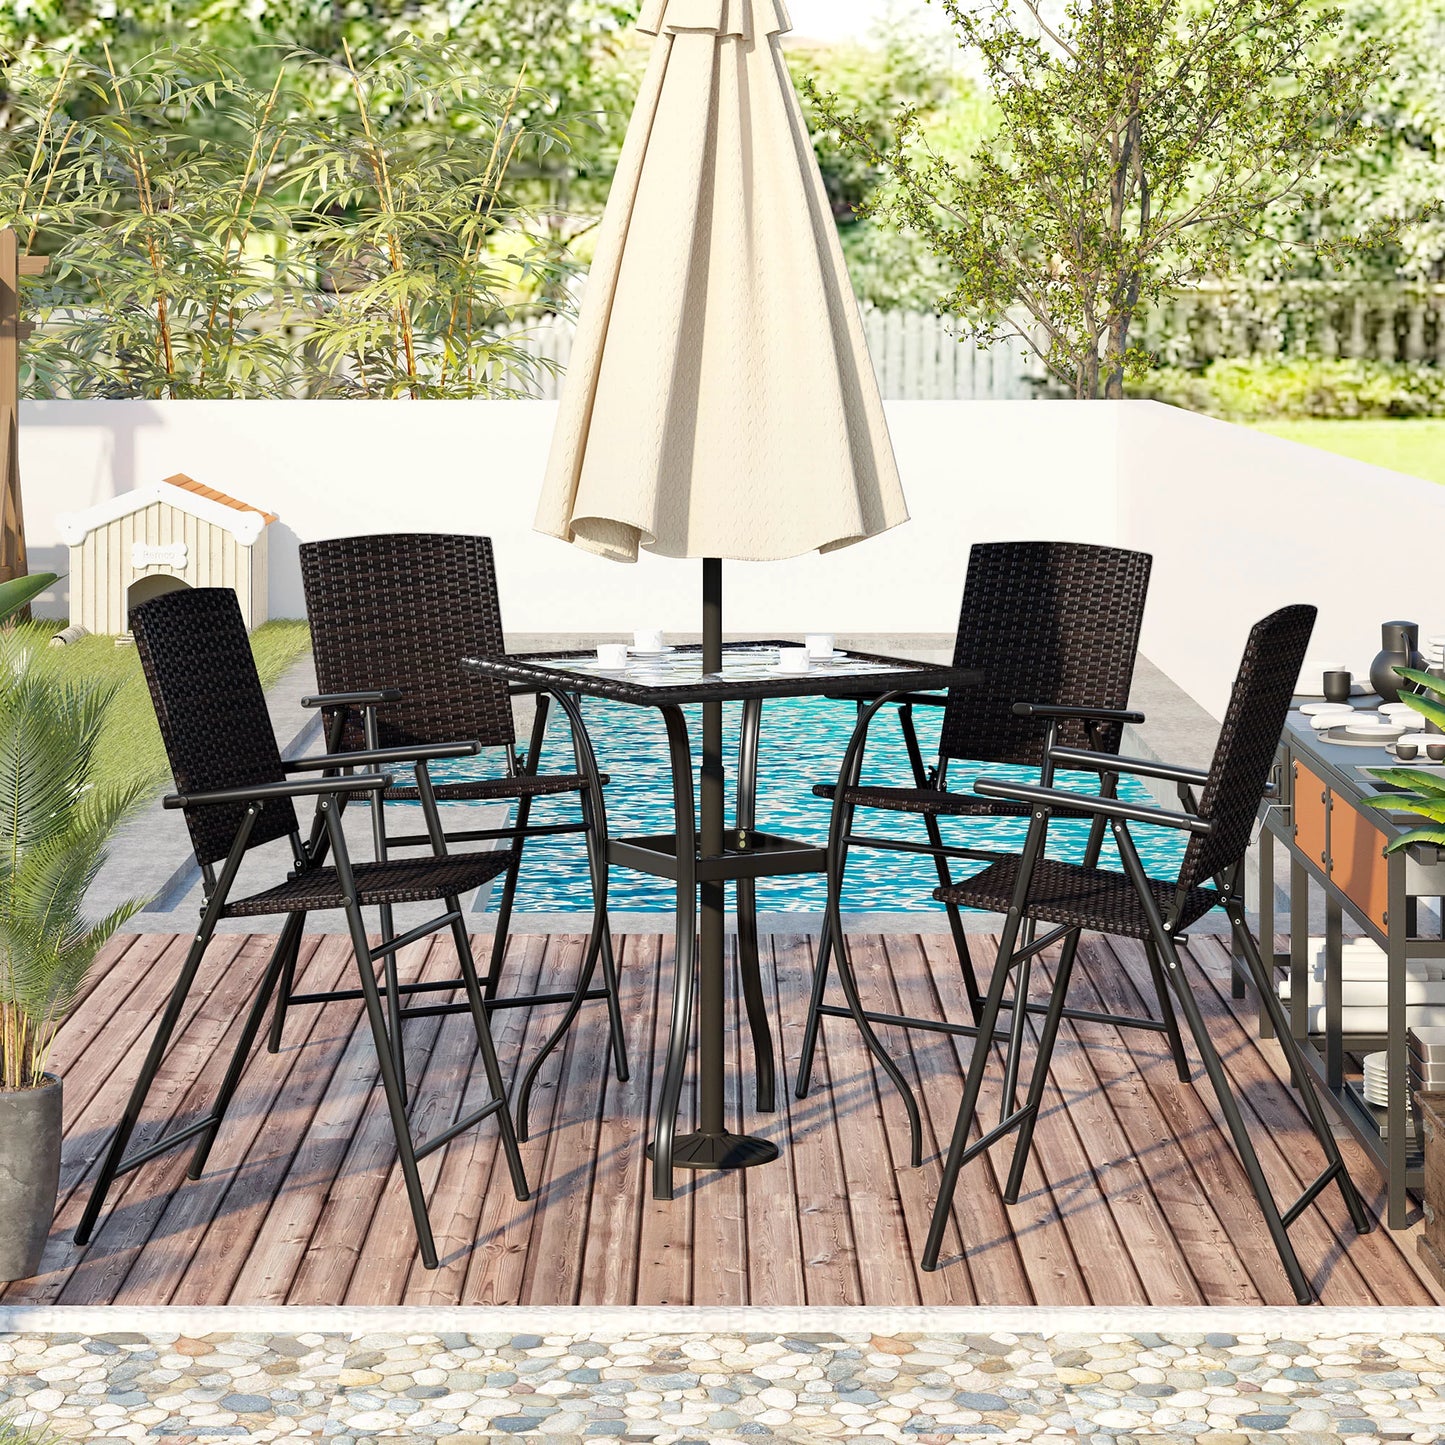 Outdoor Bar Set of 5, Patio Rattan Bar Dining Set with Table and Bar Stools, Counter Height Table Set with Chairs, Patio Wicker Furniture Conversation Set for Garden, Balcony, Pool